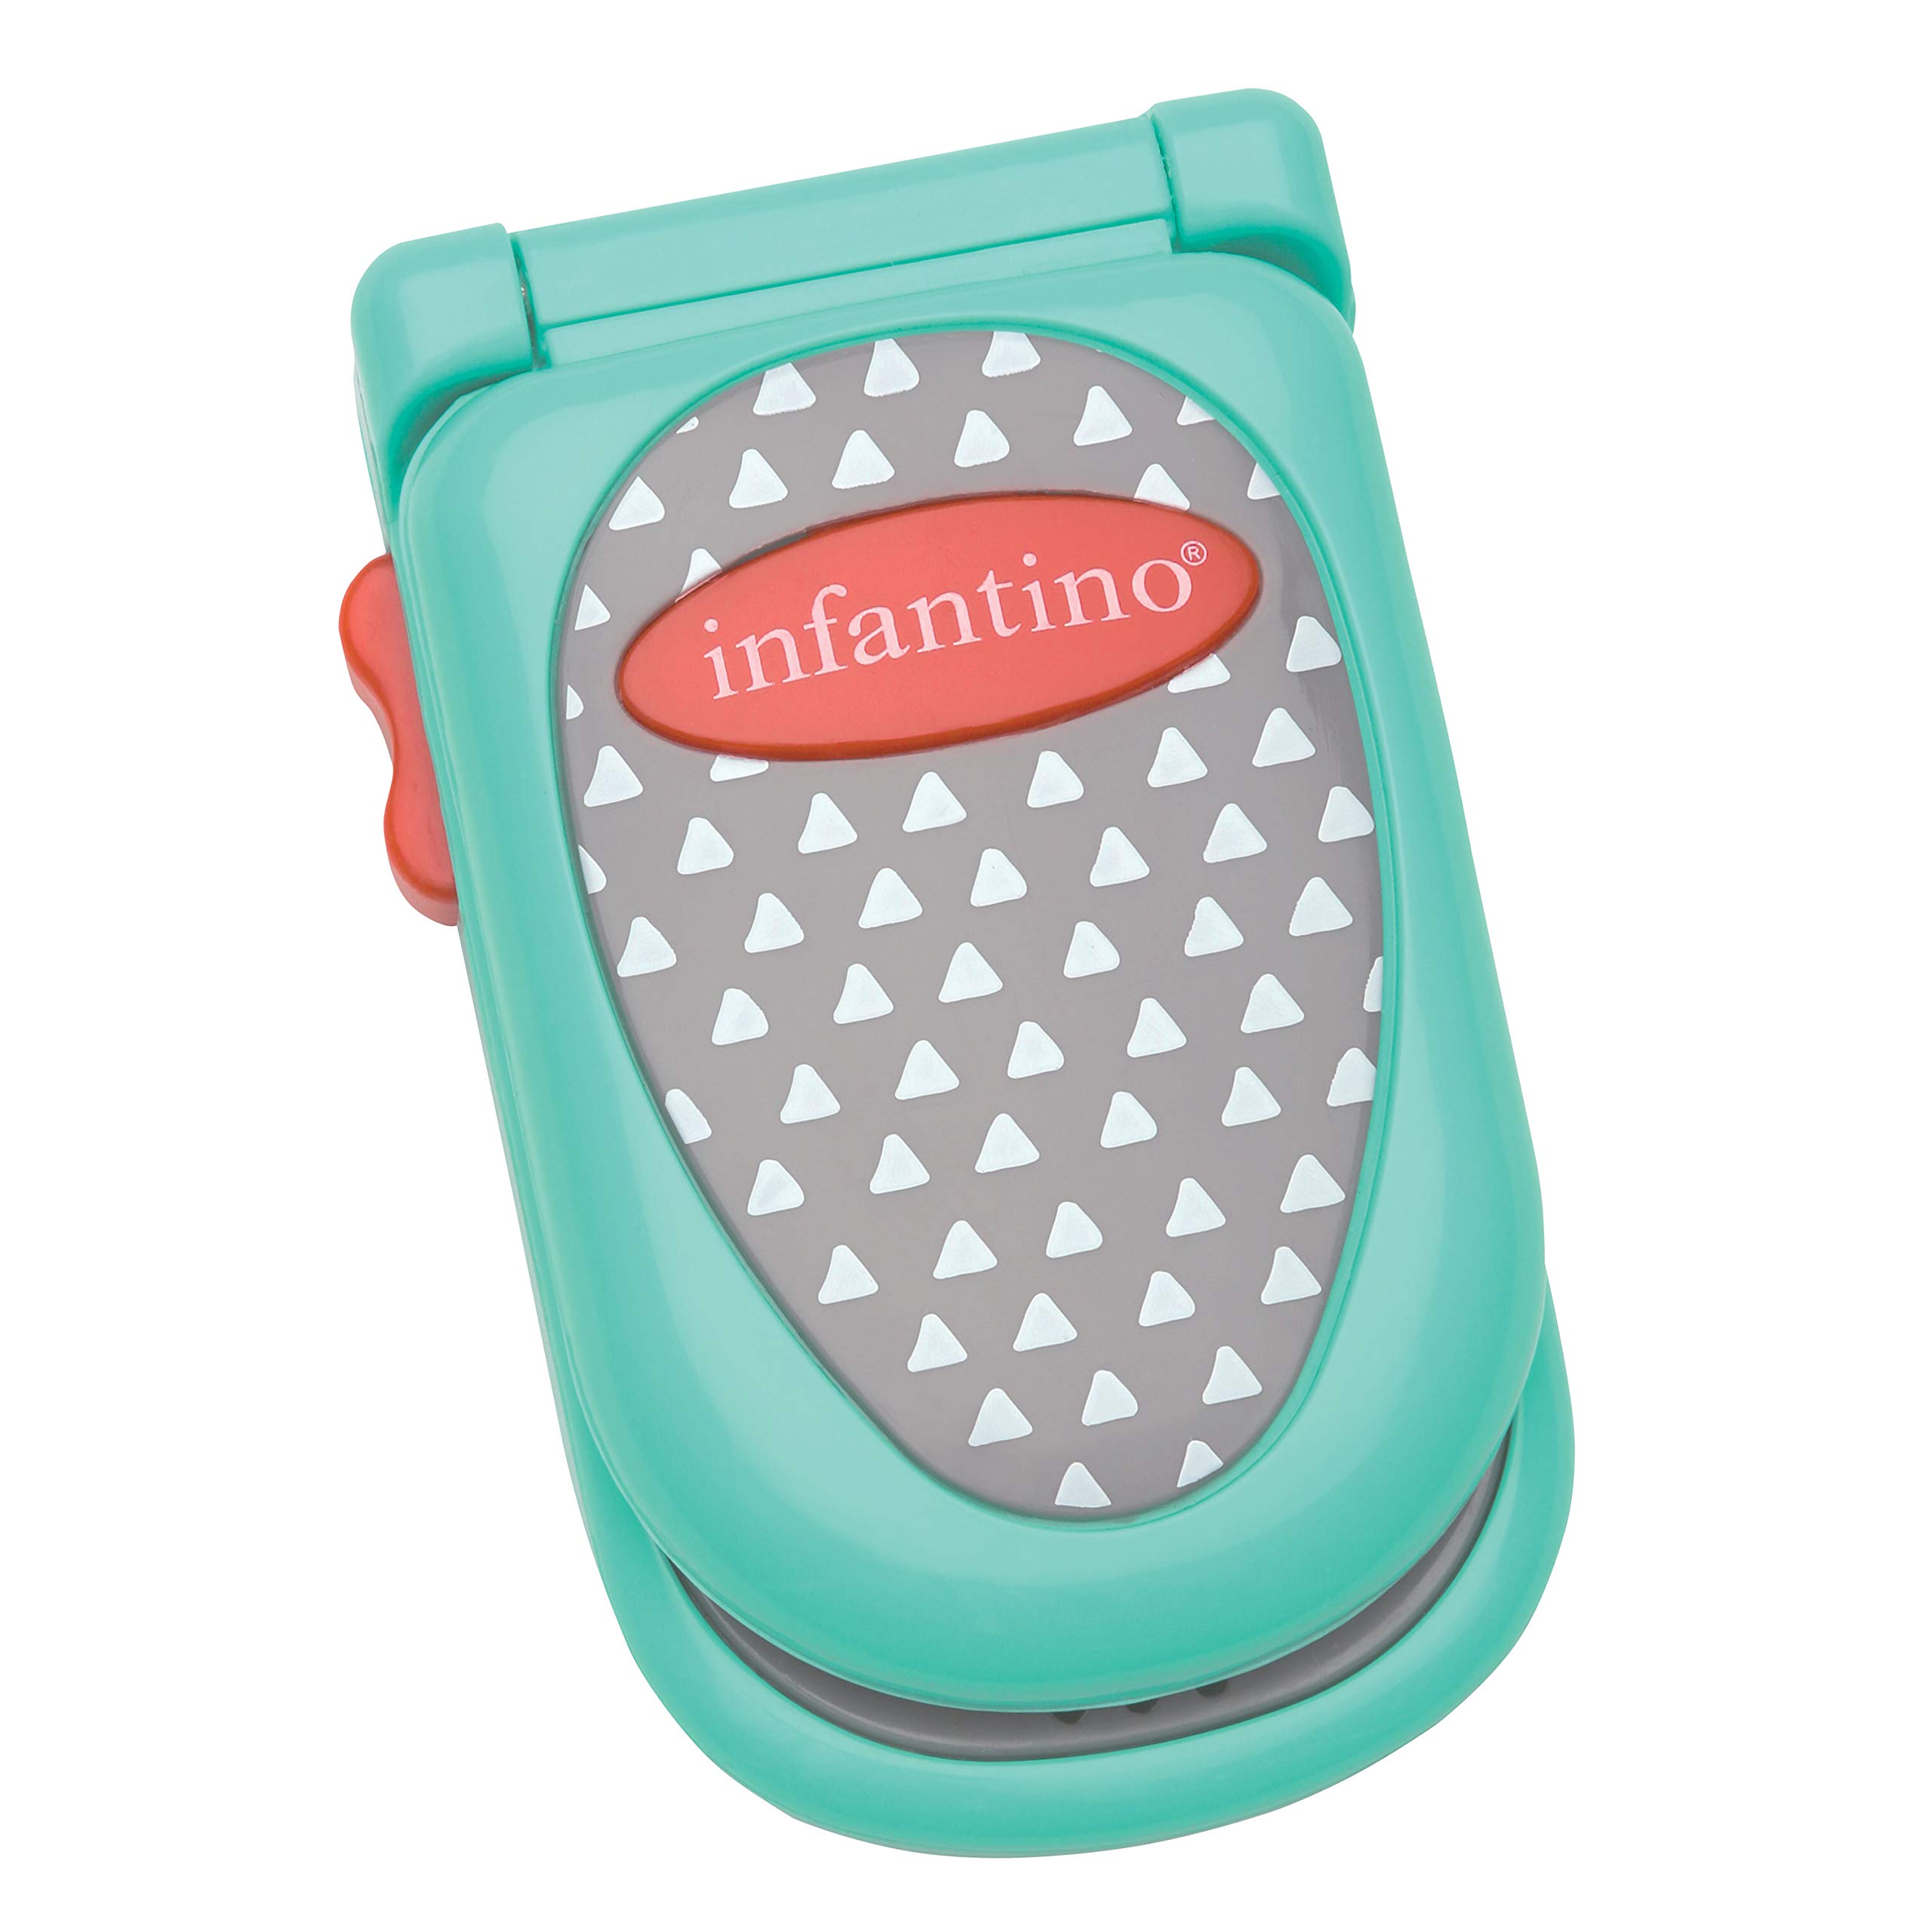 Infantino Flip and Peek Fun Phone: Bilingual with 3 English & 3 Spanish Phrases, Sounds Effects for Engagement, Peek a Boo Mirror Inside, 2 Colors, Ages 3 Months +, Teal, 1 Count (Pack of 1)